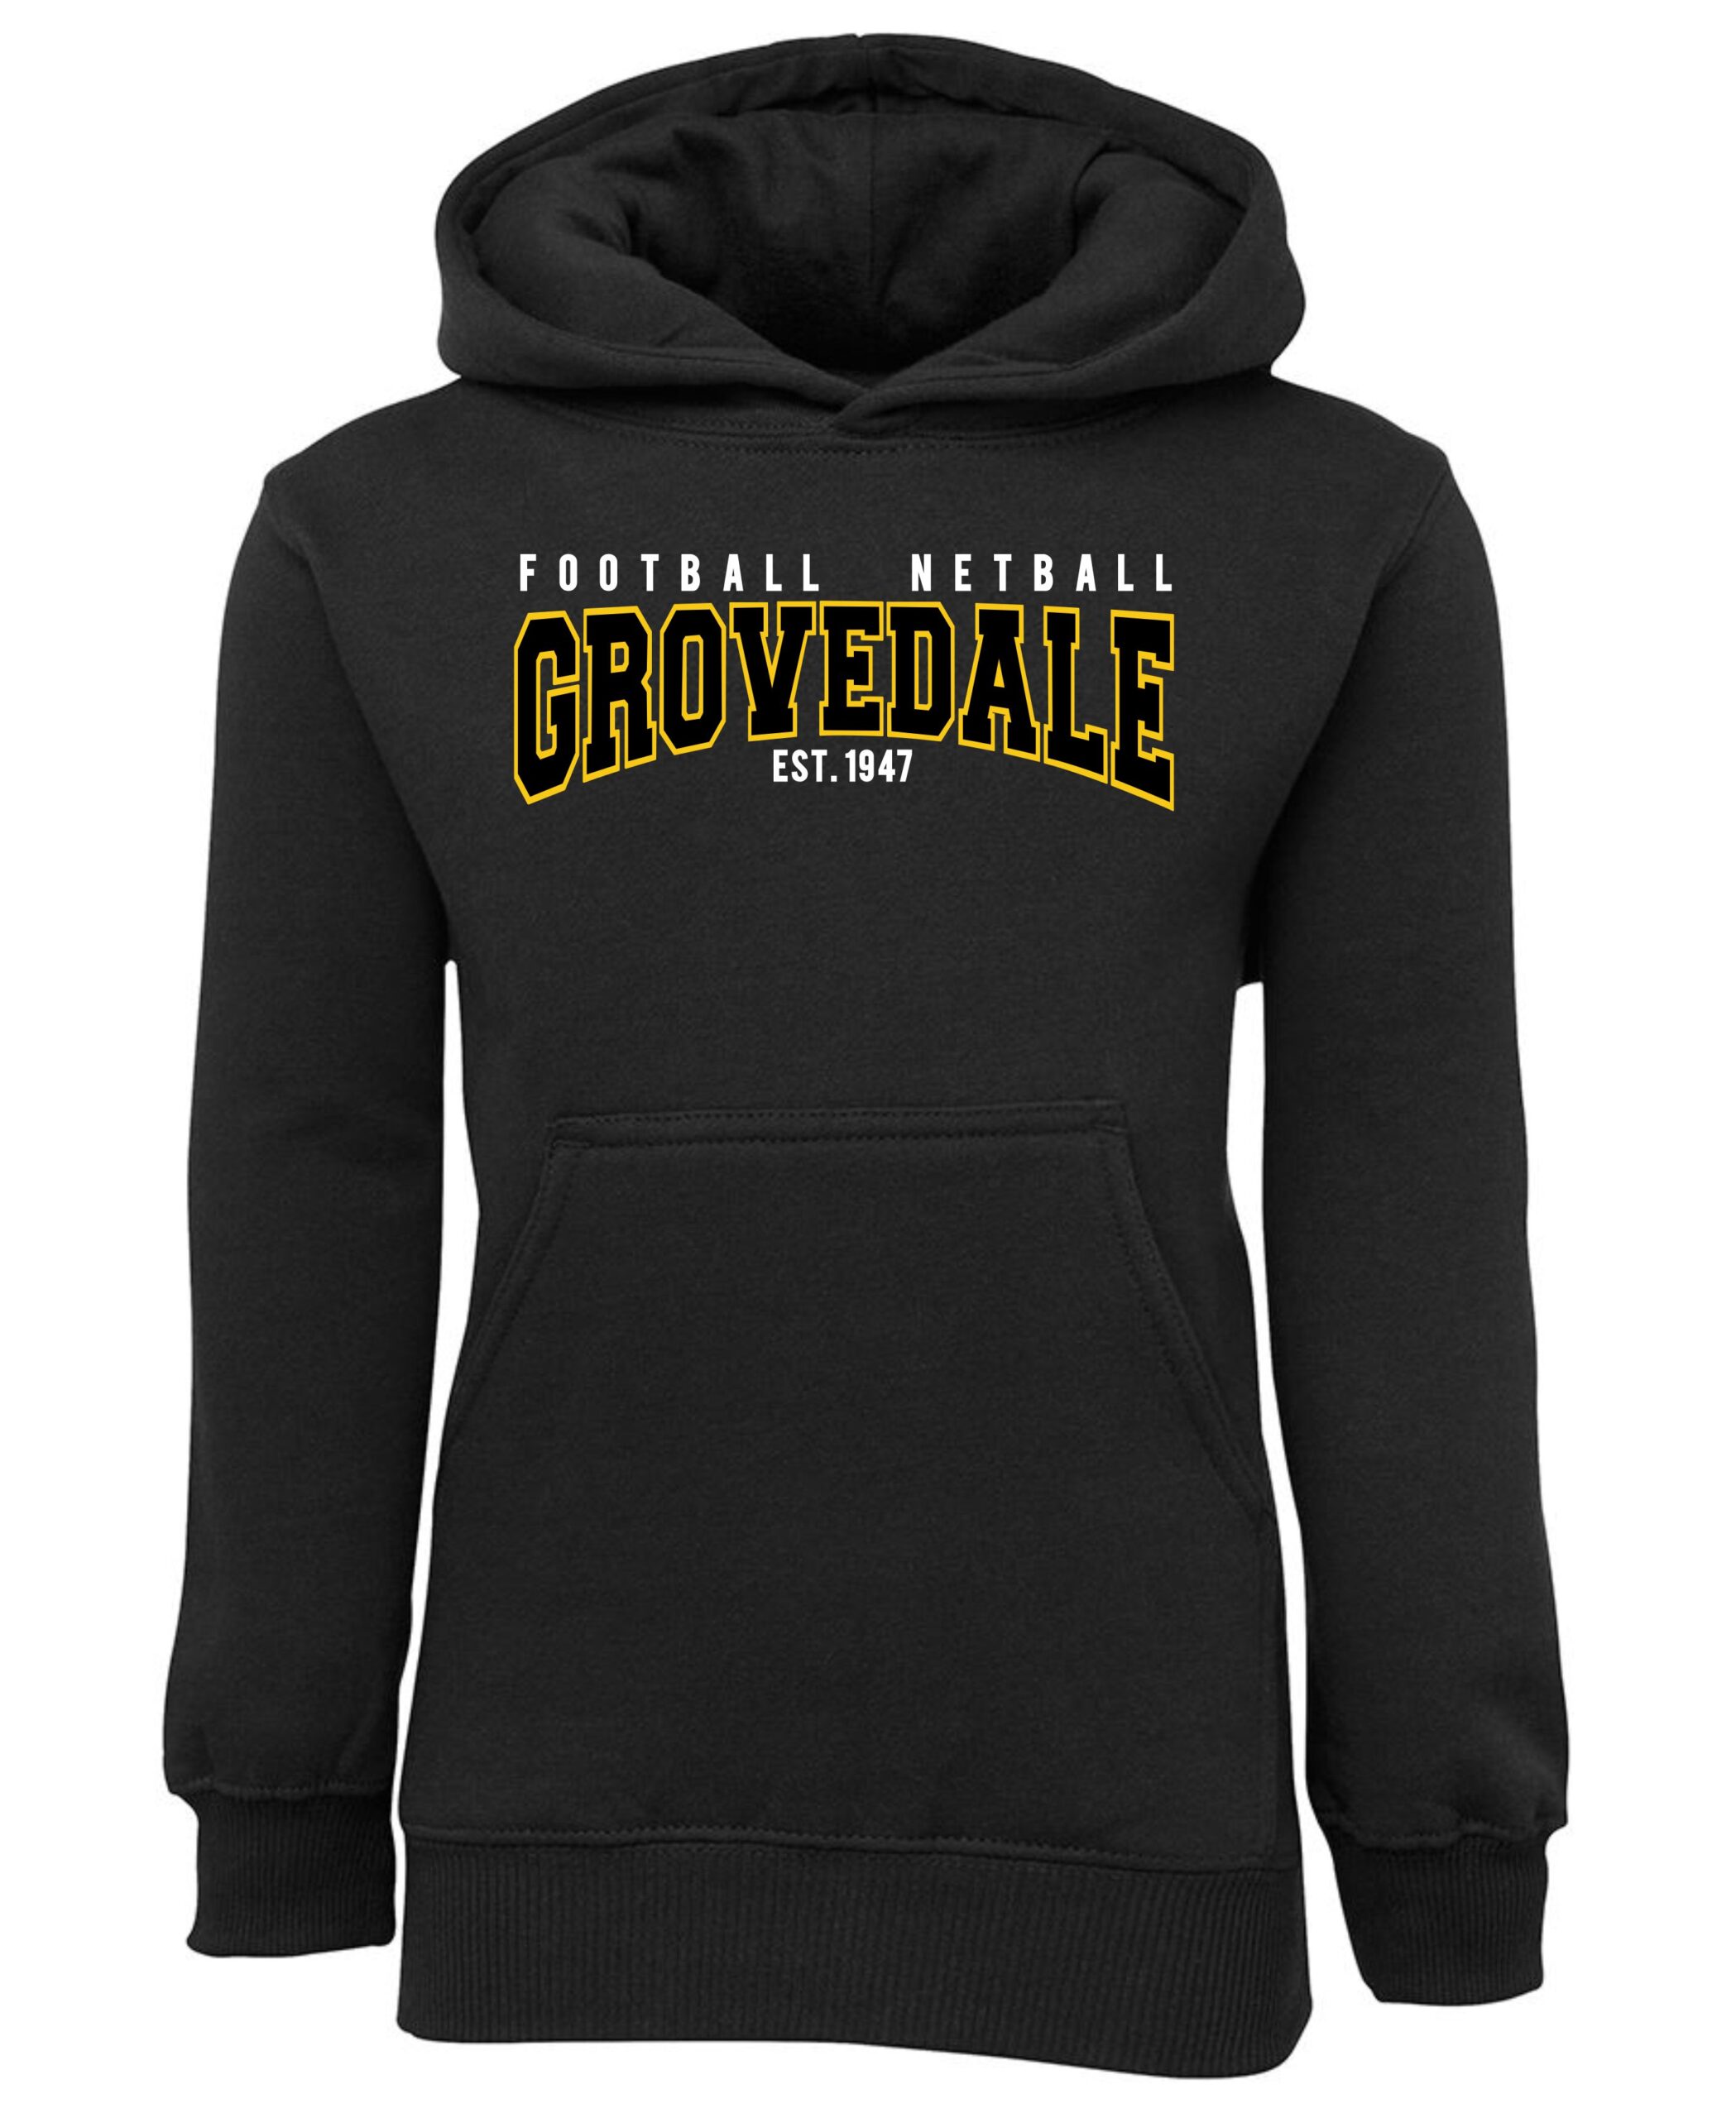 Kids Unisex Hoodie in Black or Grey with Chest Logo